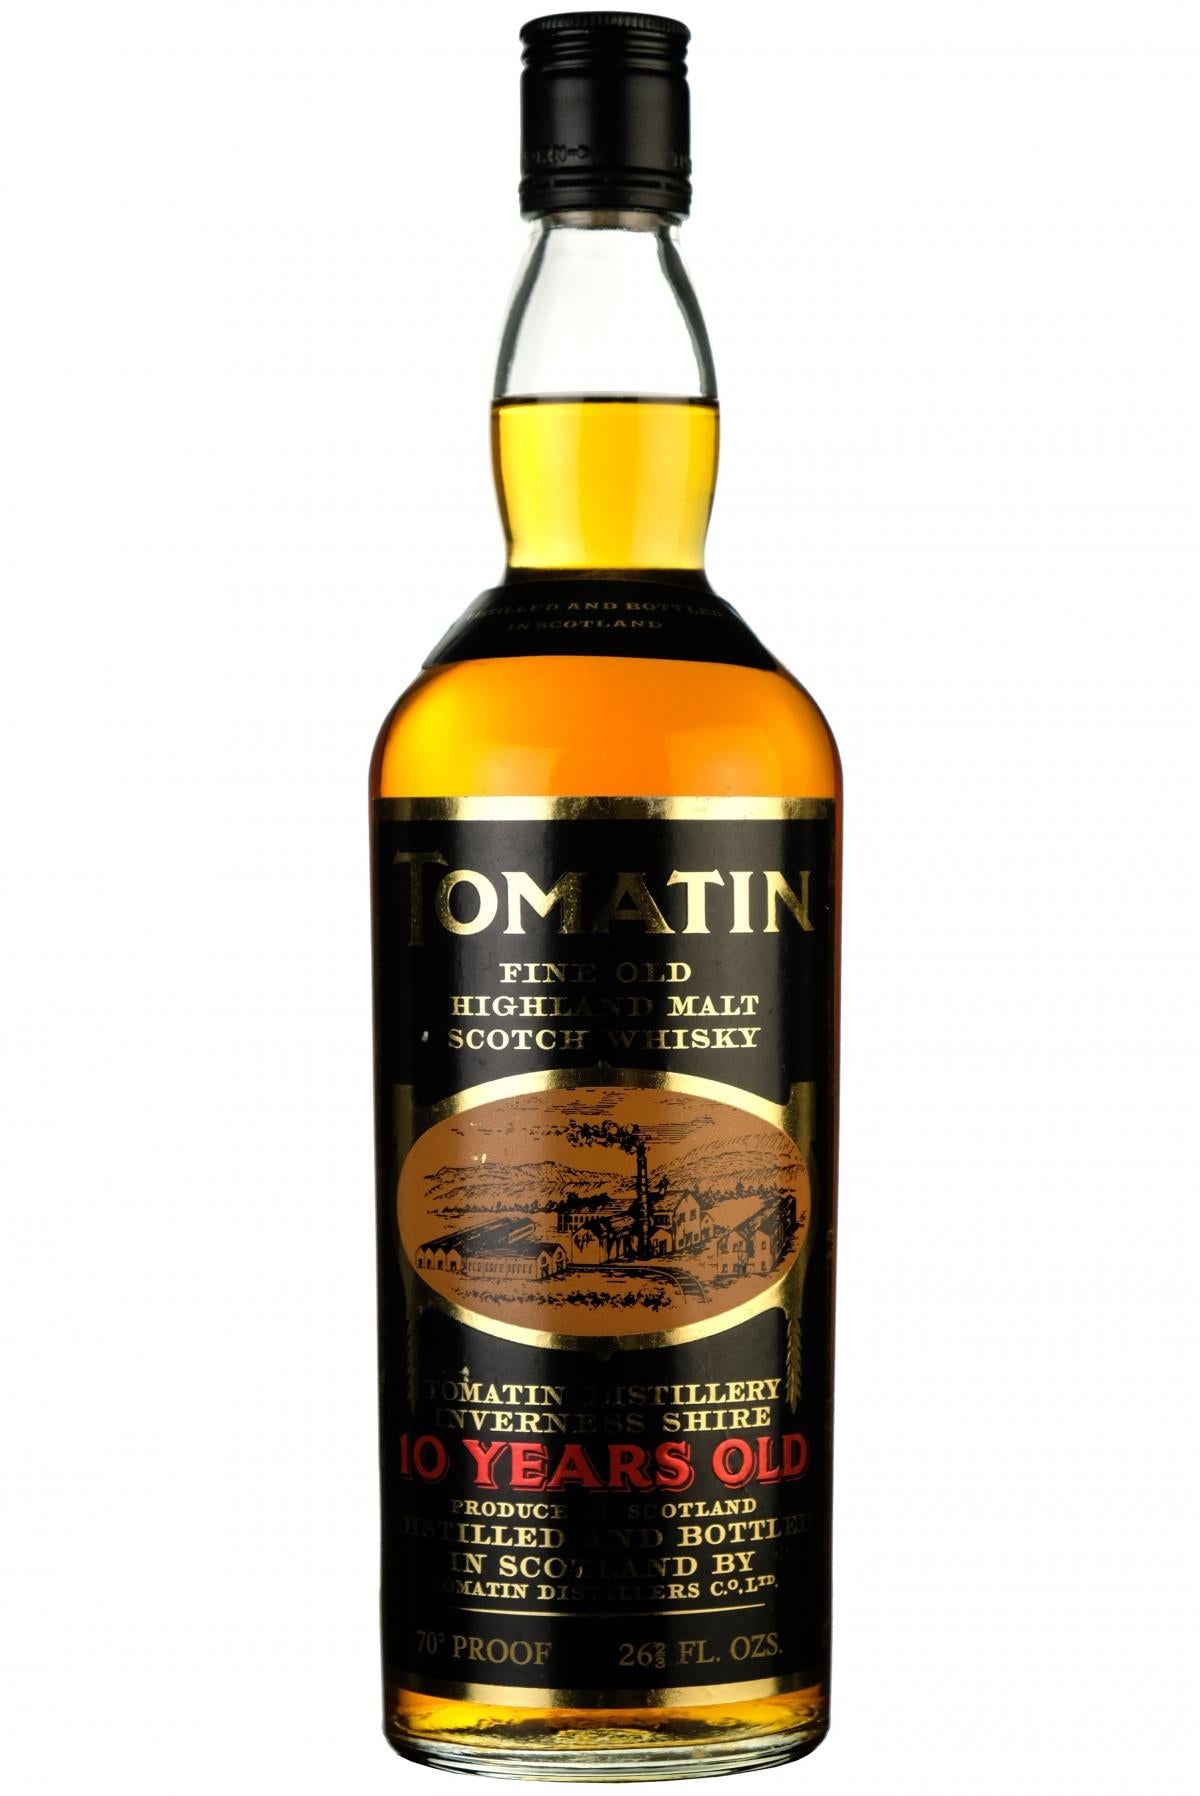 Tomatin 10 Year Old 1970s